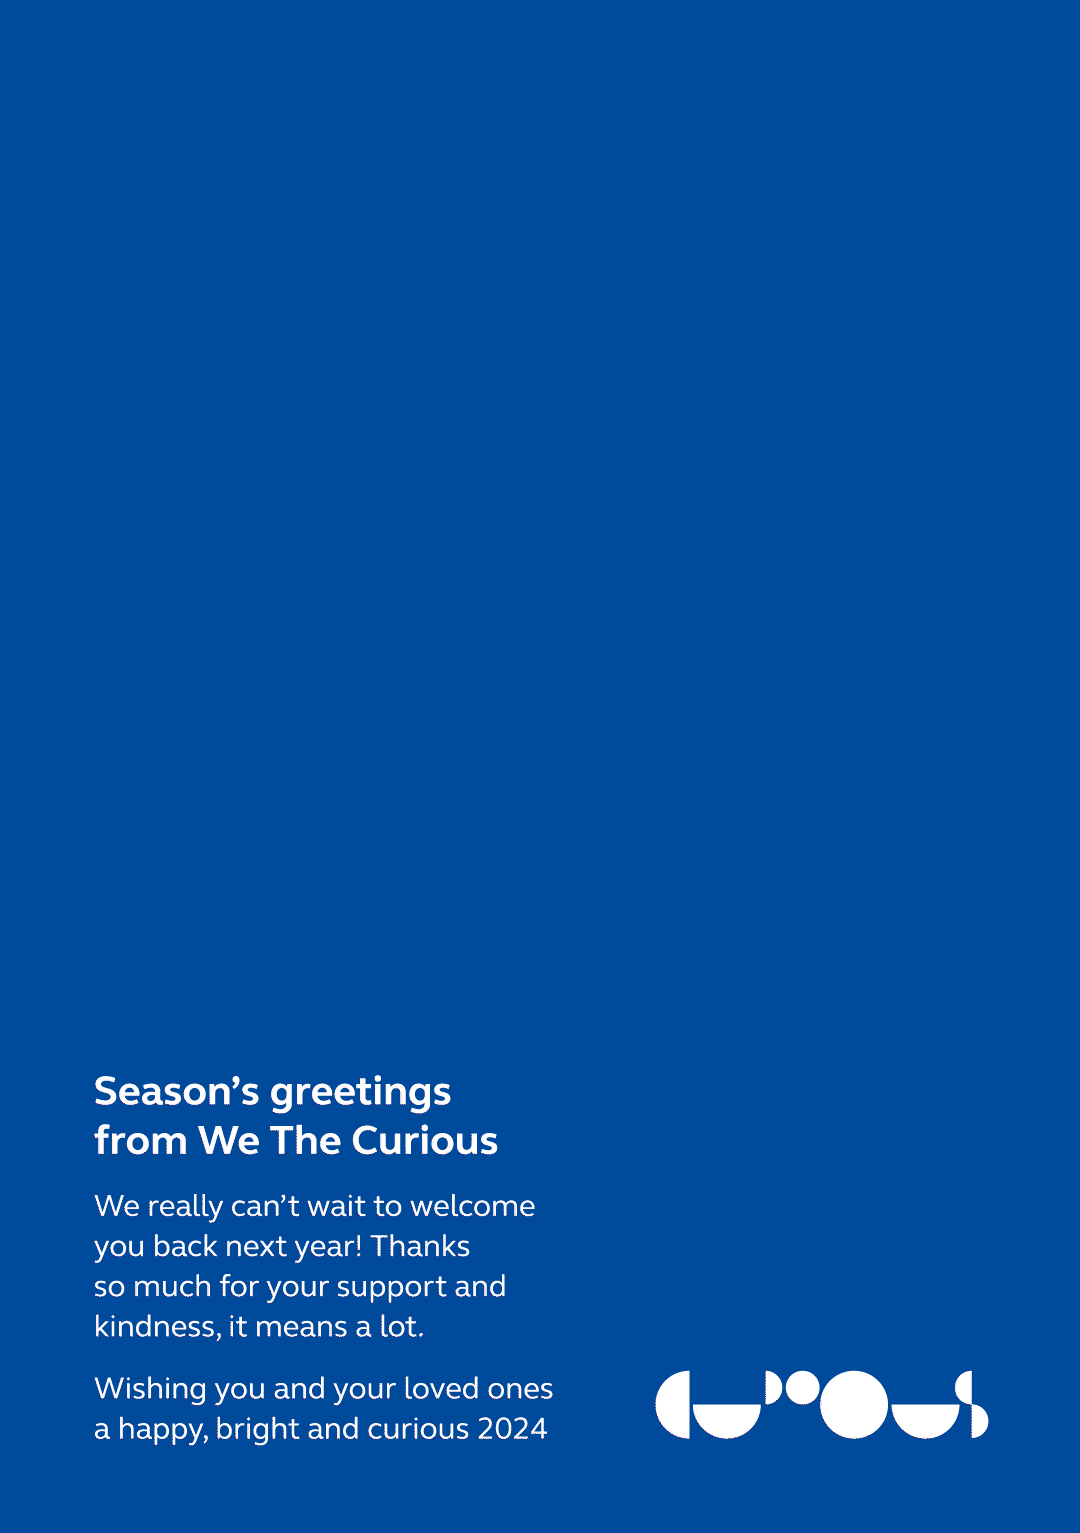  A GIF of shapes falling down into place, they are red, white and light blue and some contain snowflakes. On a dark blue background. The text below reads: Season's greetings from We The Curious. We really can't wait to welcome you back next year. Thanks so much for your support and kindness, it means a lot. Wishing you and your loved ones a happy, bright and curious 2024.